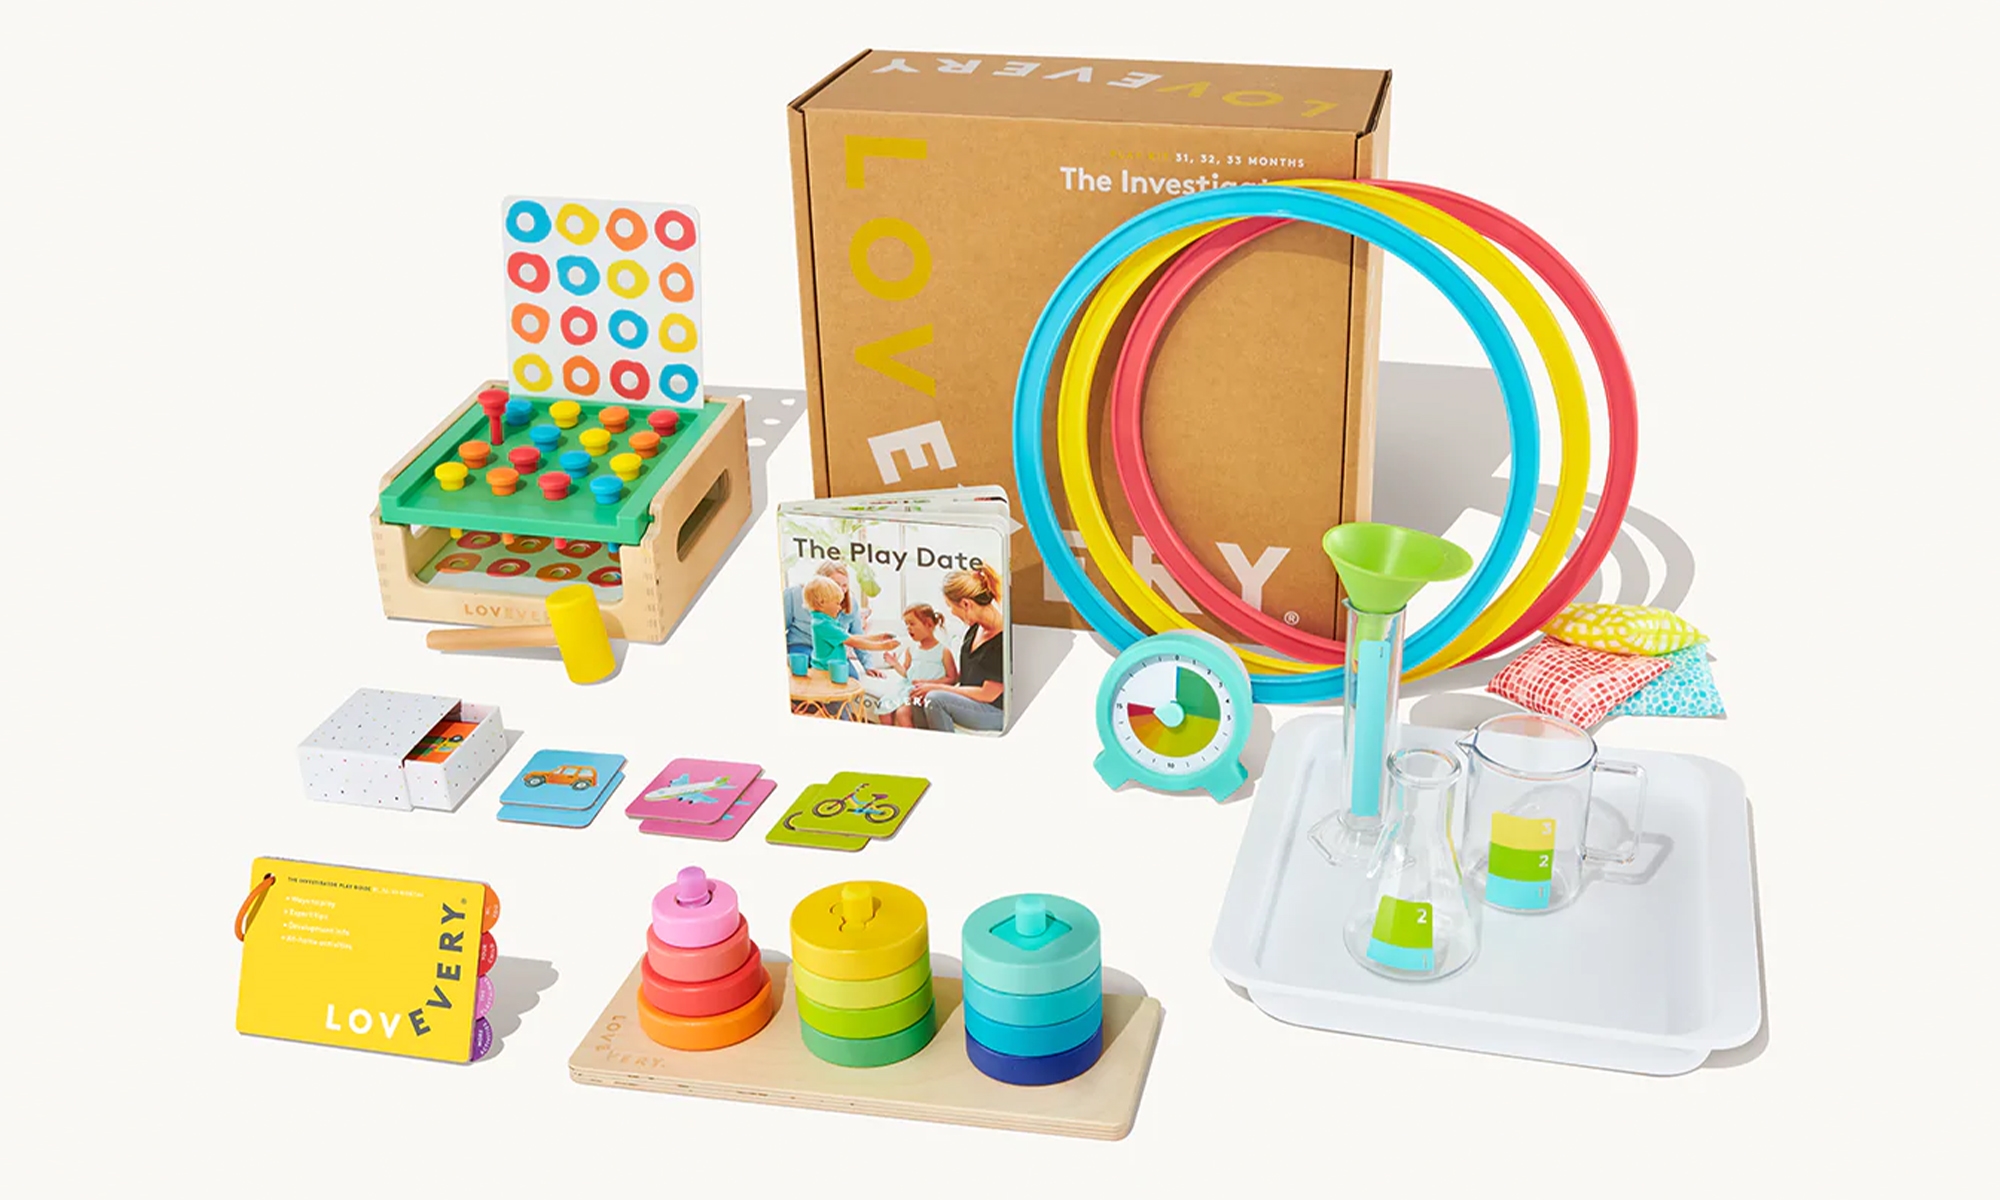 The best educational toys for kids | DeviceDaily.com